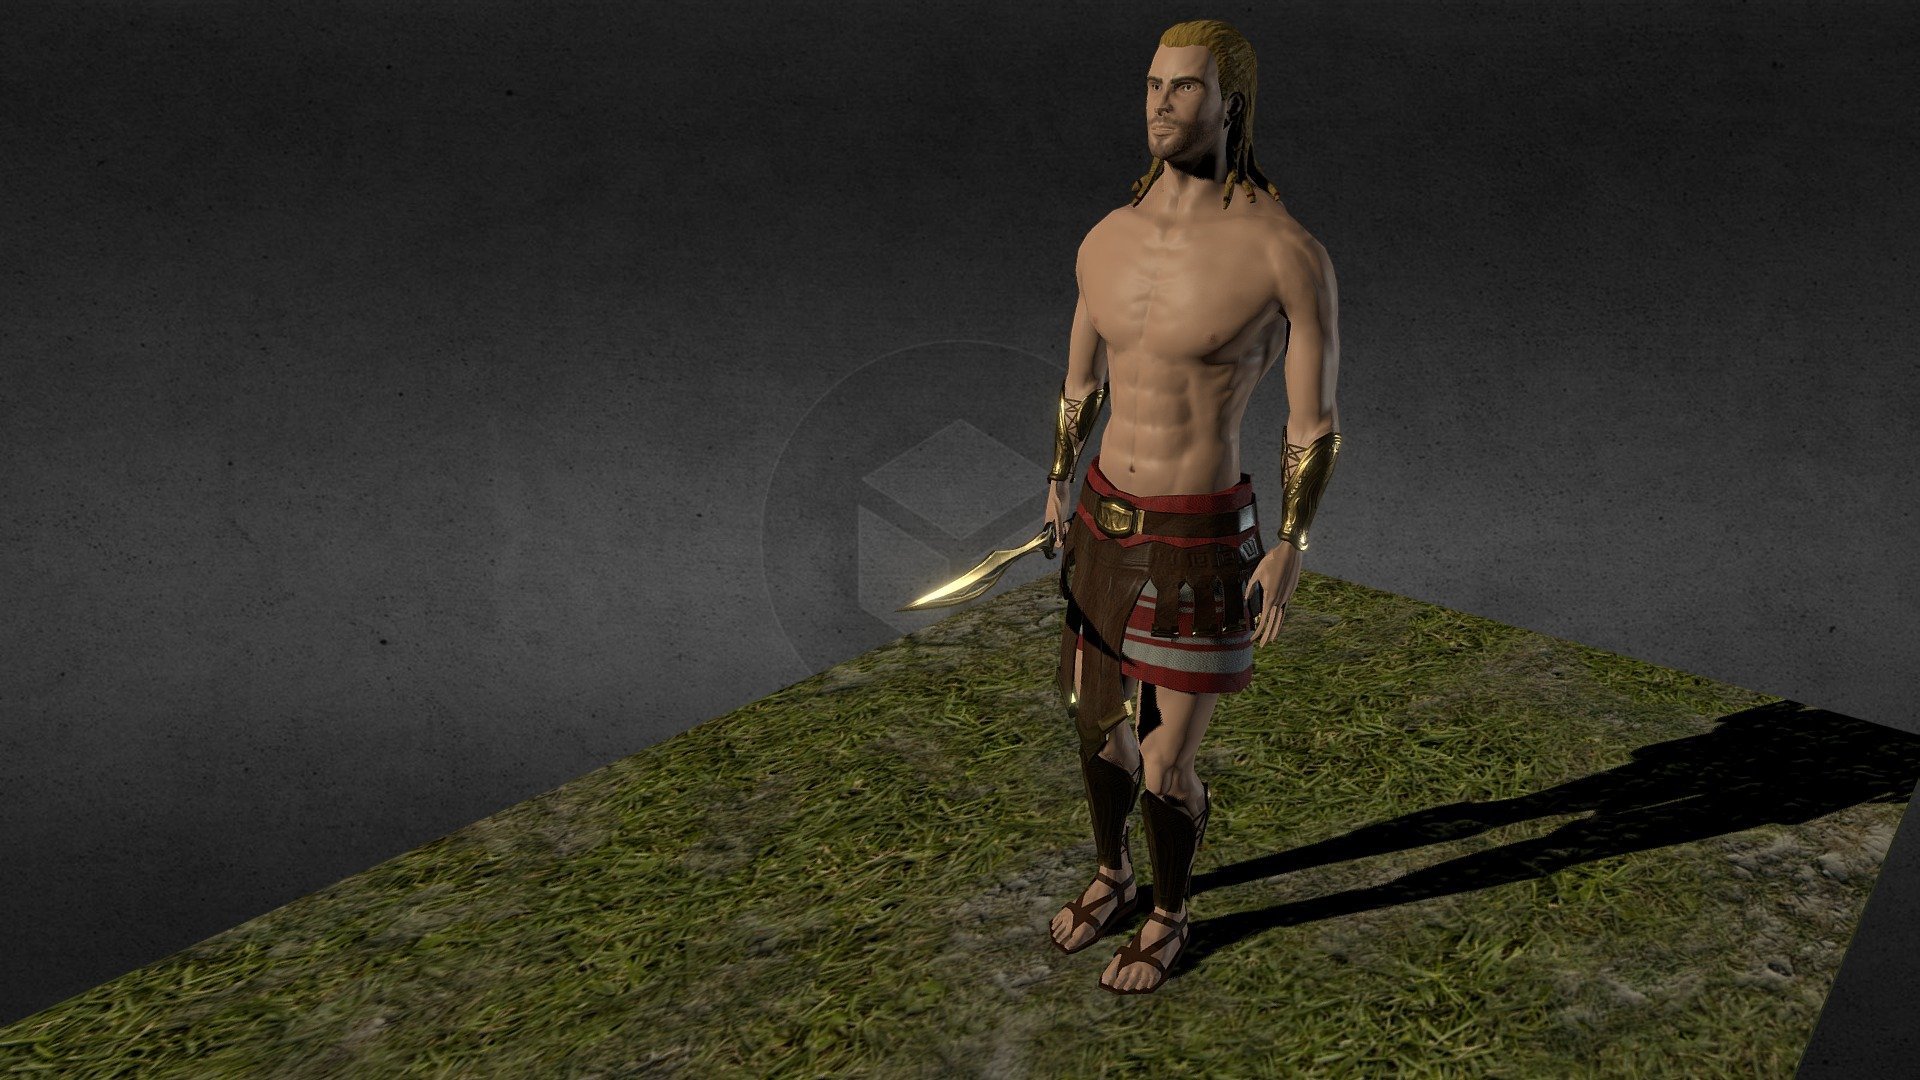 This is my Player Character for the game I created
Based during the time of the ancient Greeks with the aim of reaching the summit of the Olympus

Modeled in ZBrush,
Retopology,Rig,Animated in 3dsMax, 
Textured in SubstancePainter - Greek Player Character - 3D model by Davide Chiarenza (@IlTurco) 3d model